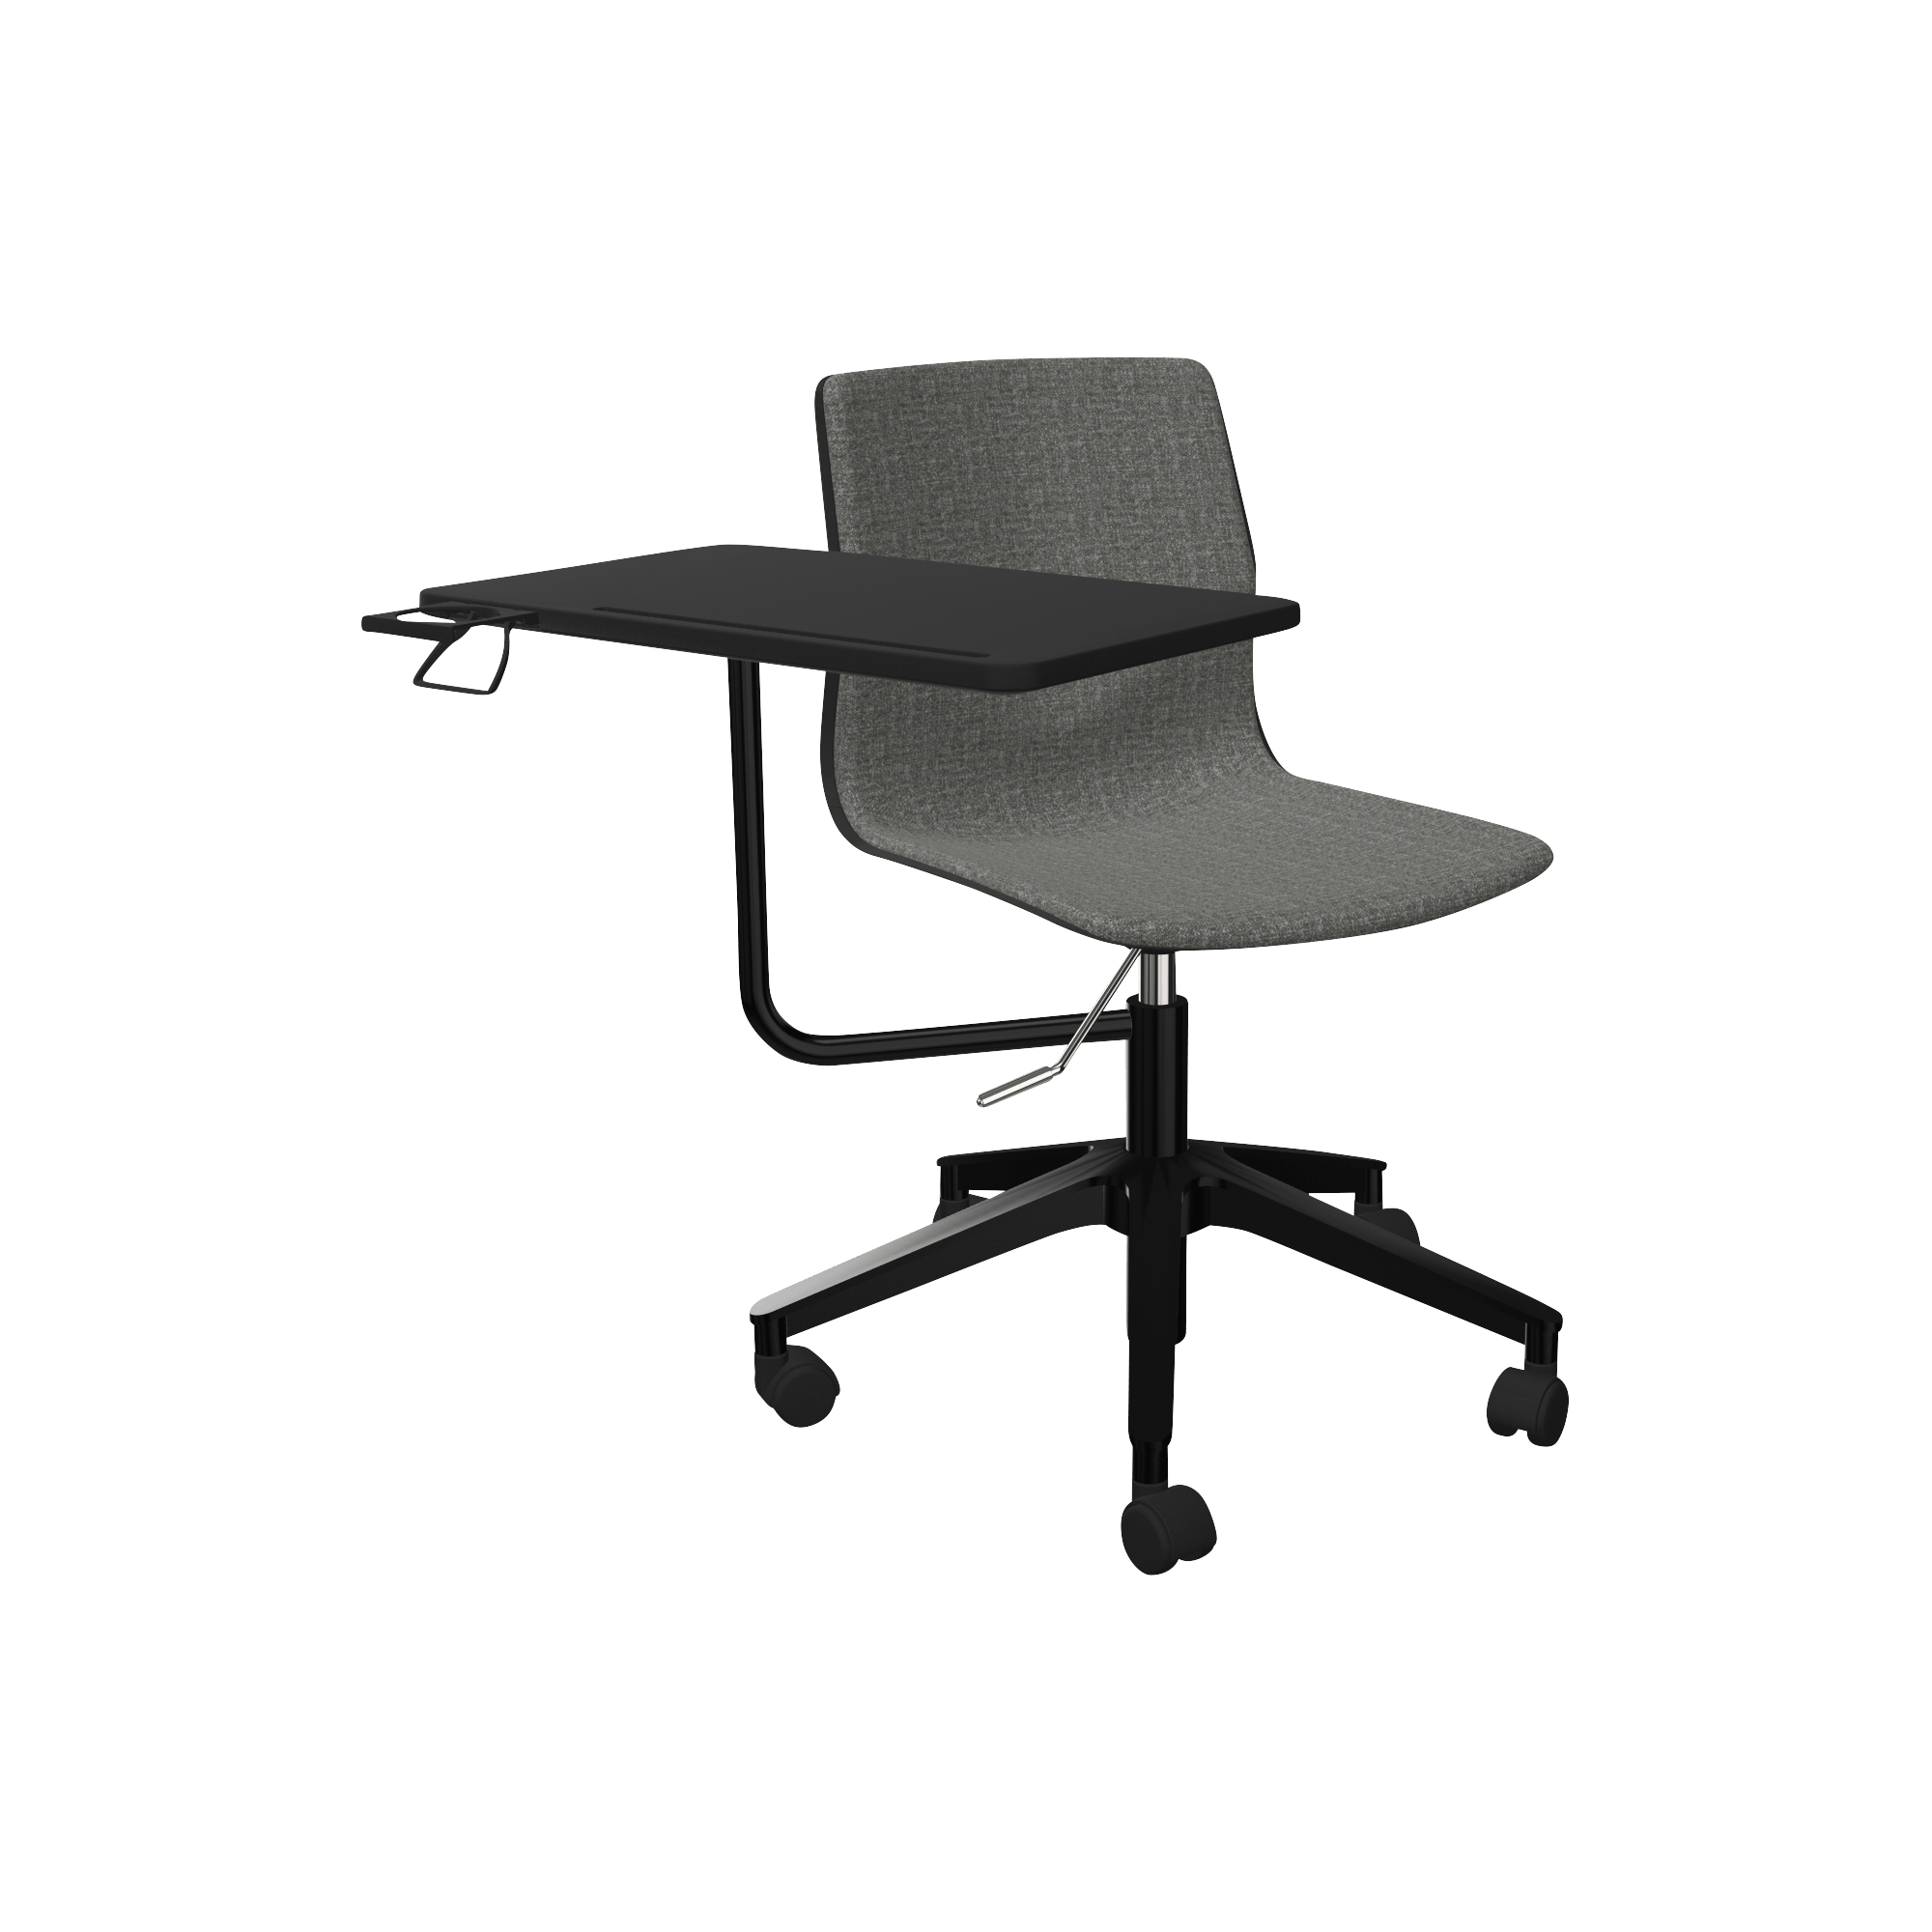 Grey pedestal lecture chair with white work desk attached